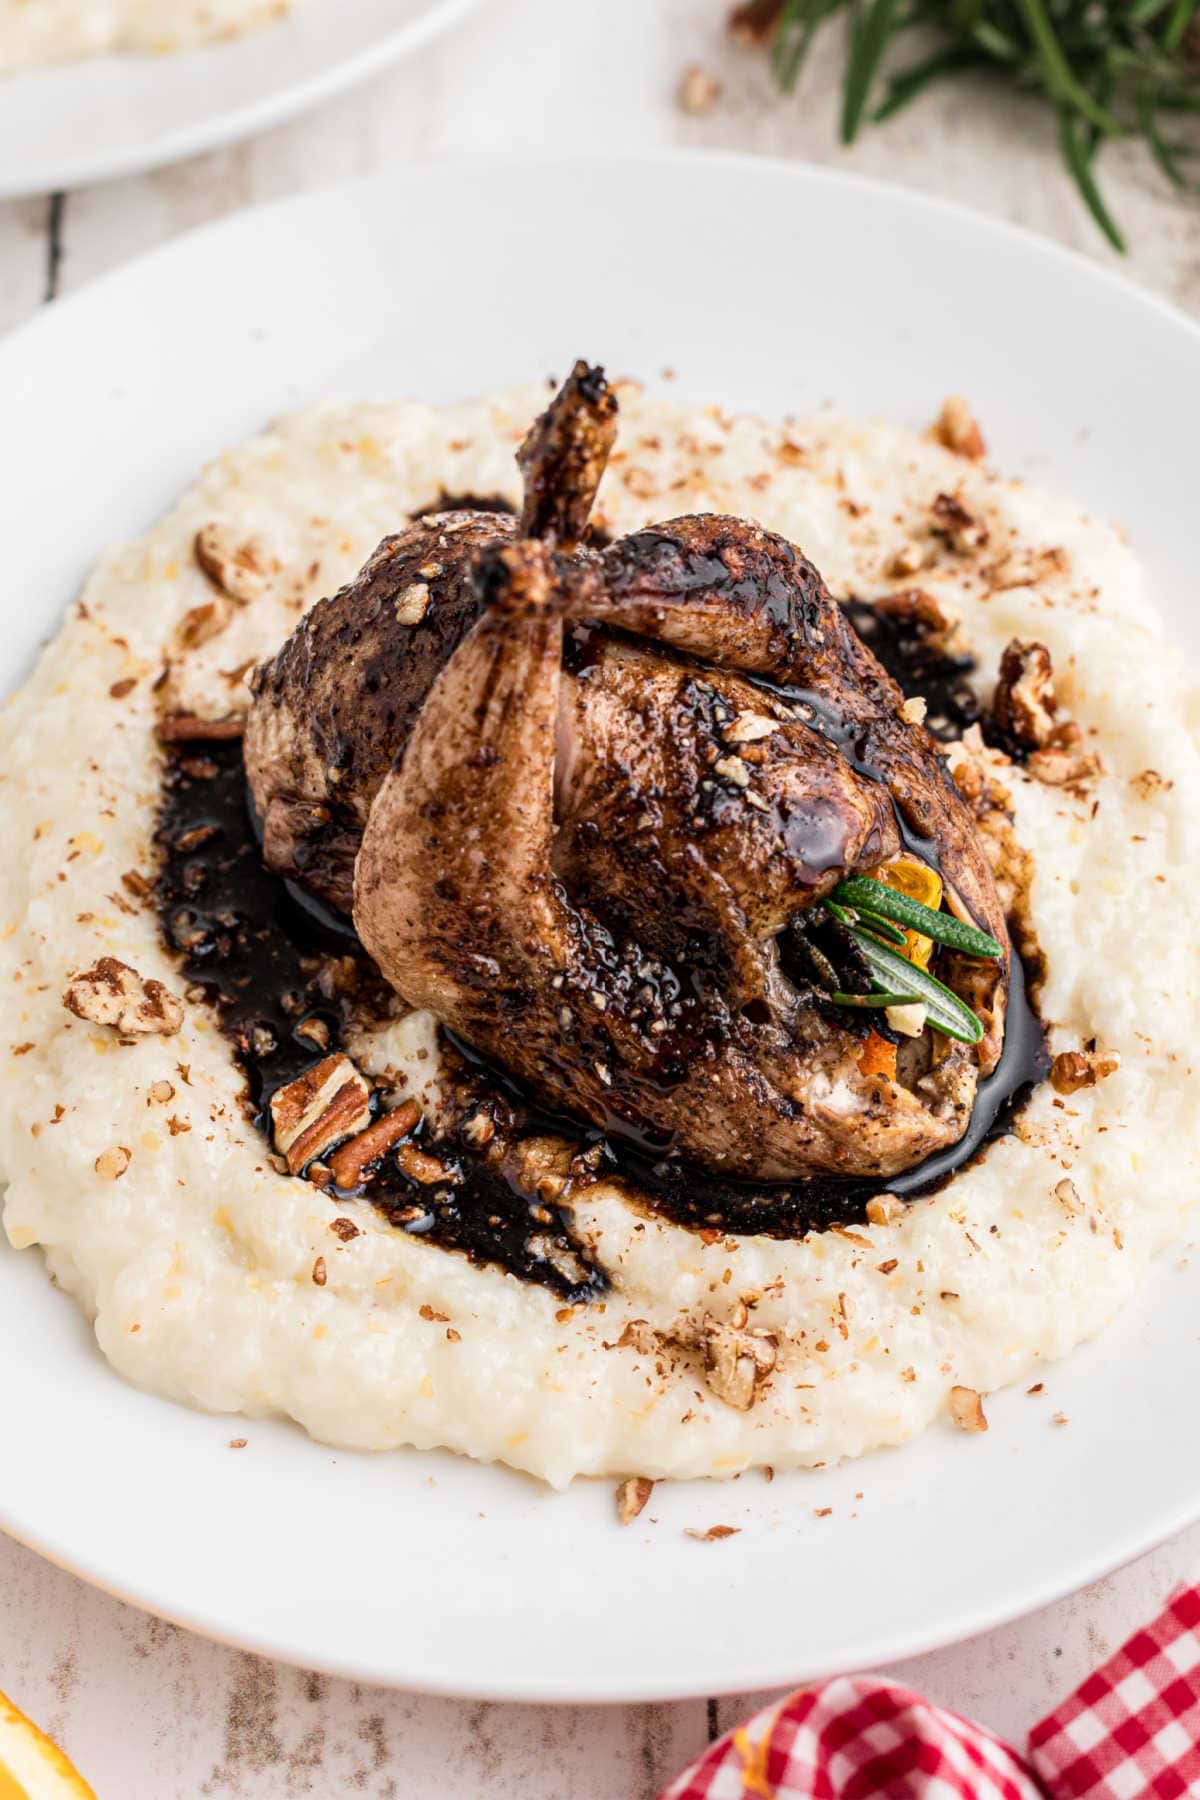 A roasted quail on a bed of cheese grits.